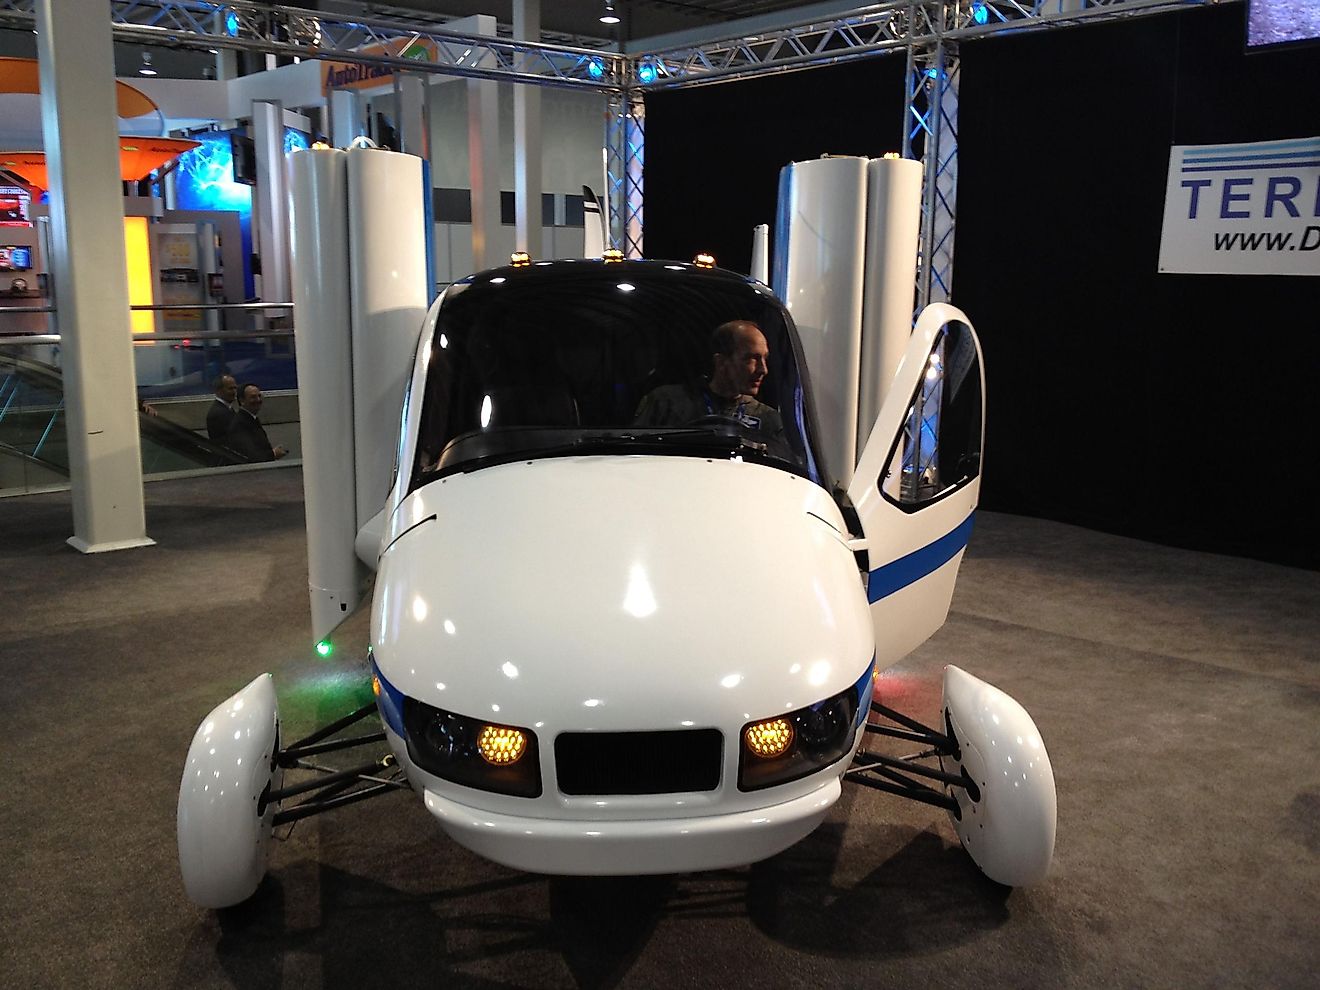 Producing flying cars in incredibly expensive. Image credit: wikimedia.org